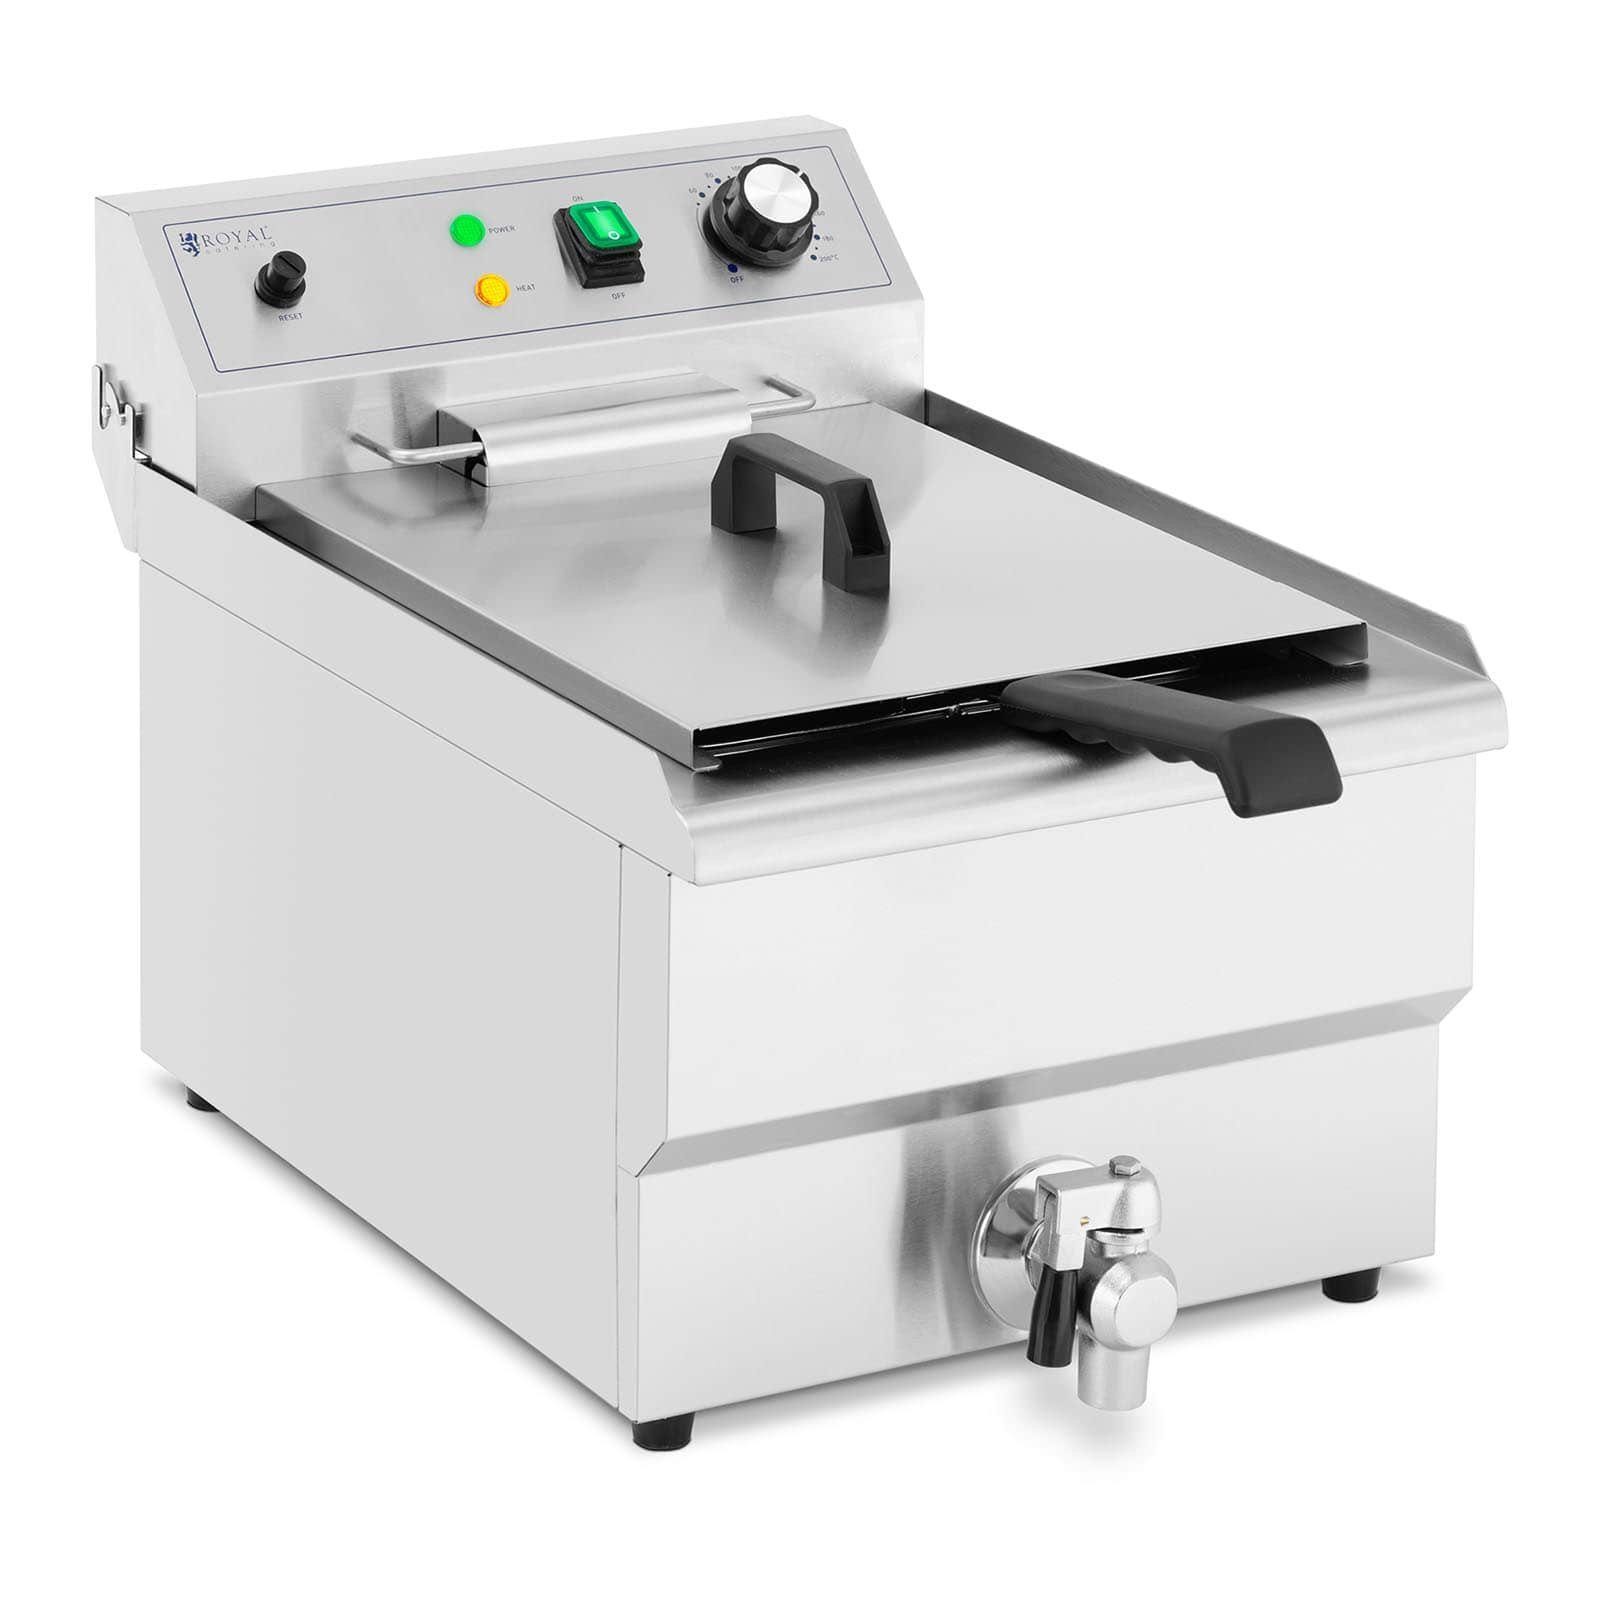 Royal Catering Fritteuse Elektro-Fritteuse Fritteuse Gastro Kaltzonen Fritteuse 13 L 3.000 W, 3000 W